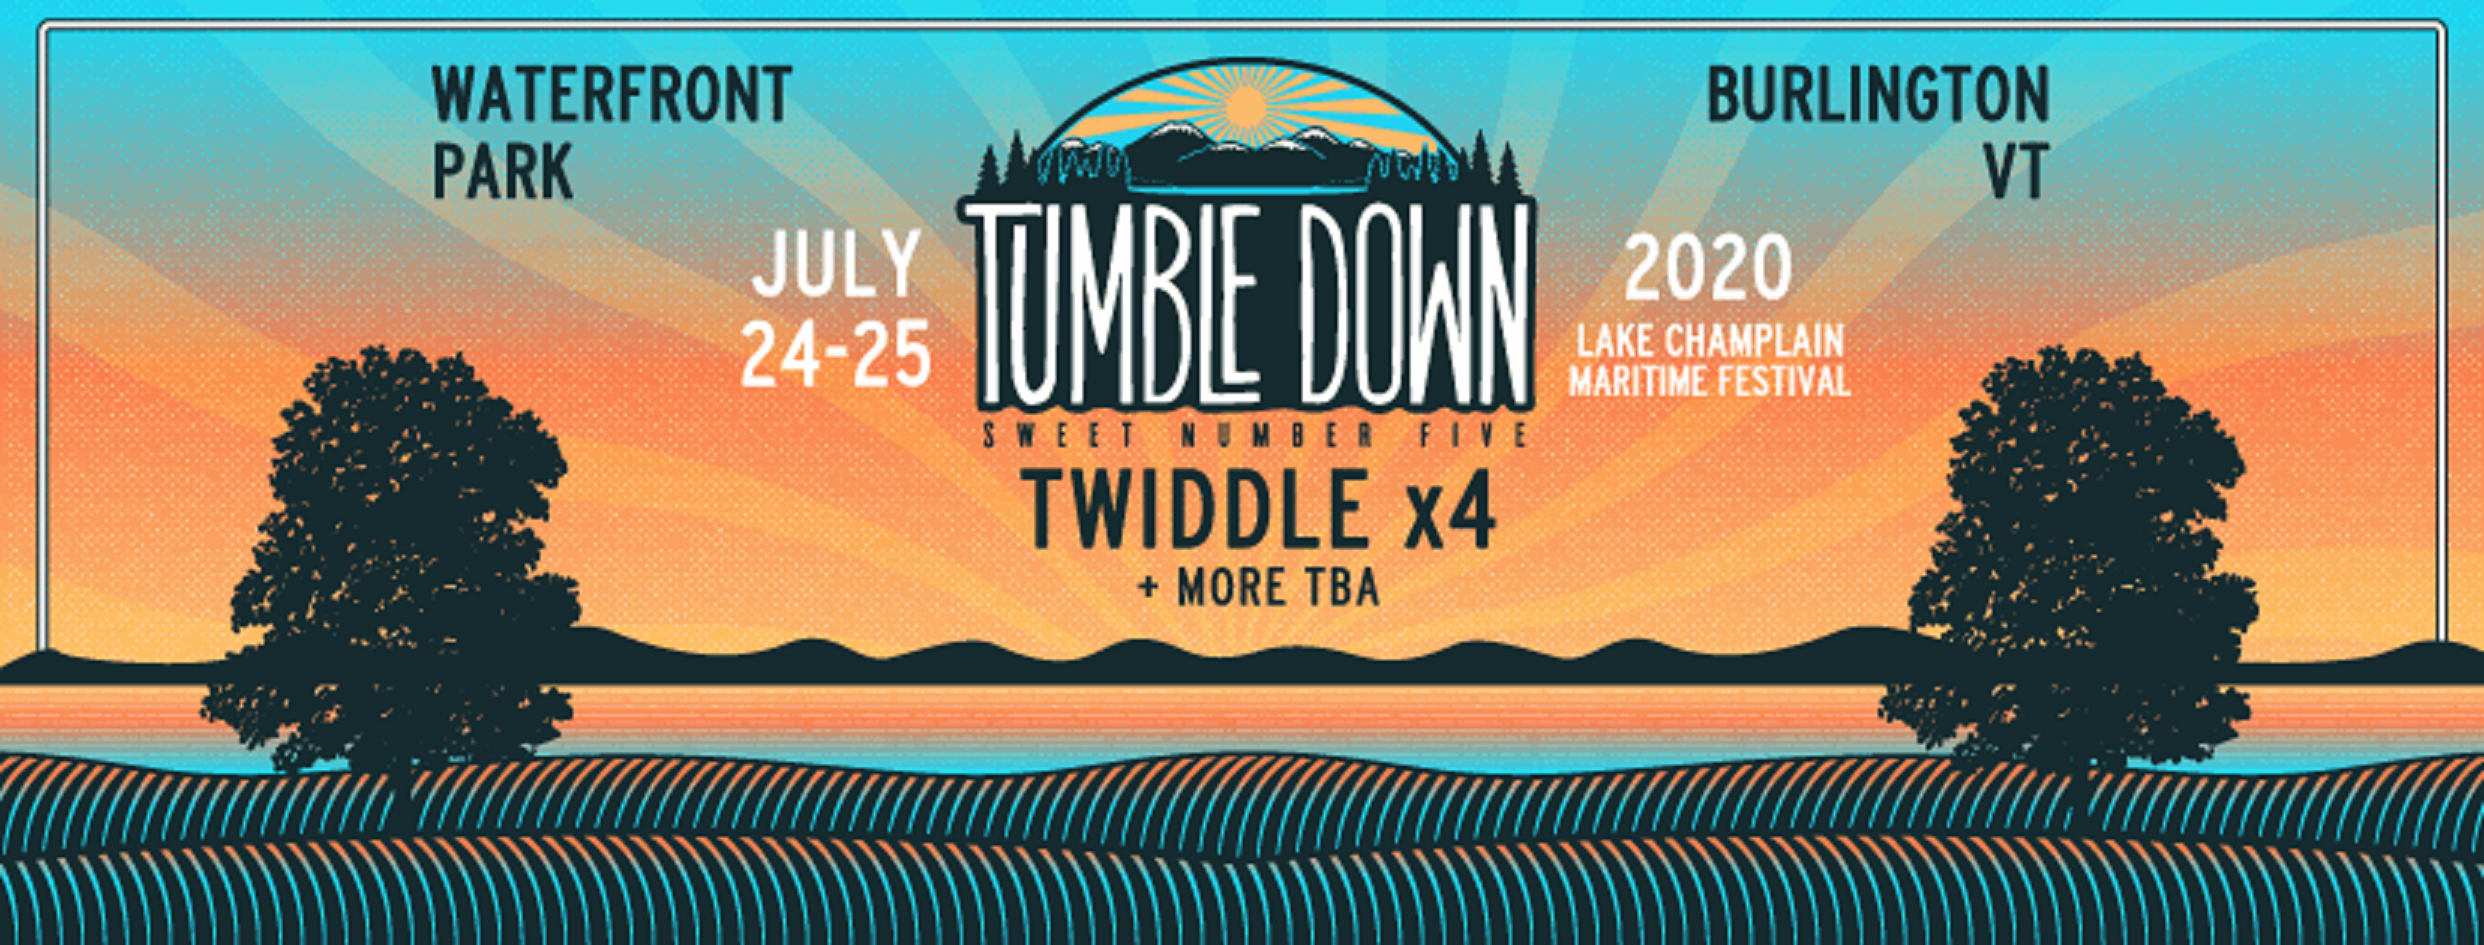 JUST ANNOUNCED: Twiddle's Tumble Down 7/24 - 7/25/20 at Waterfront Park